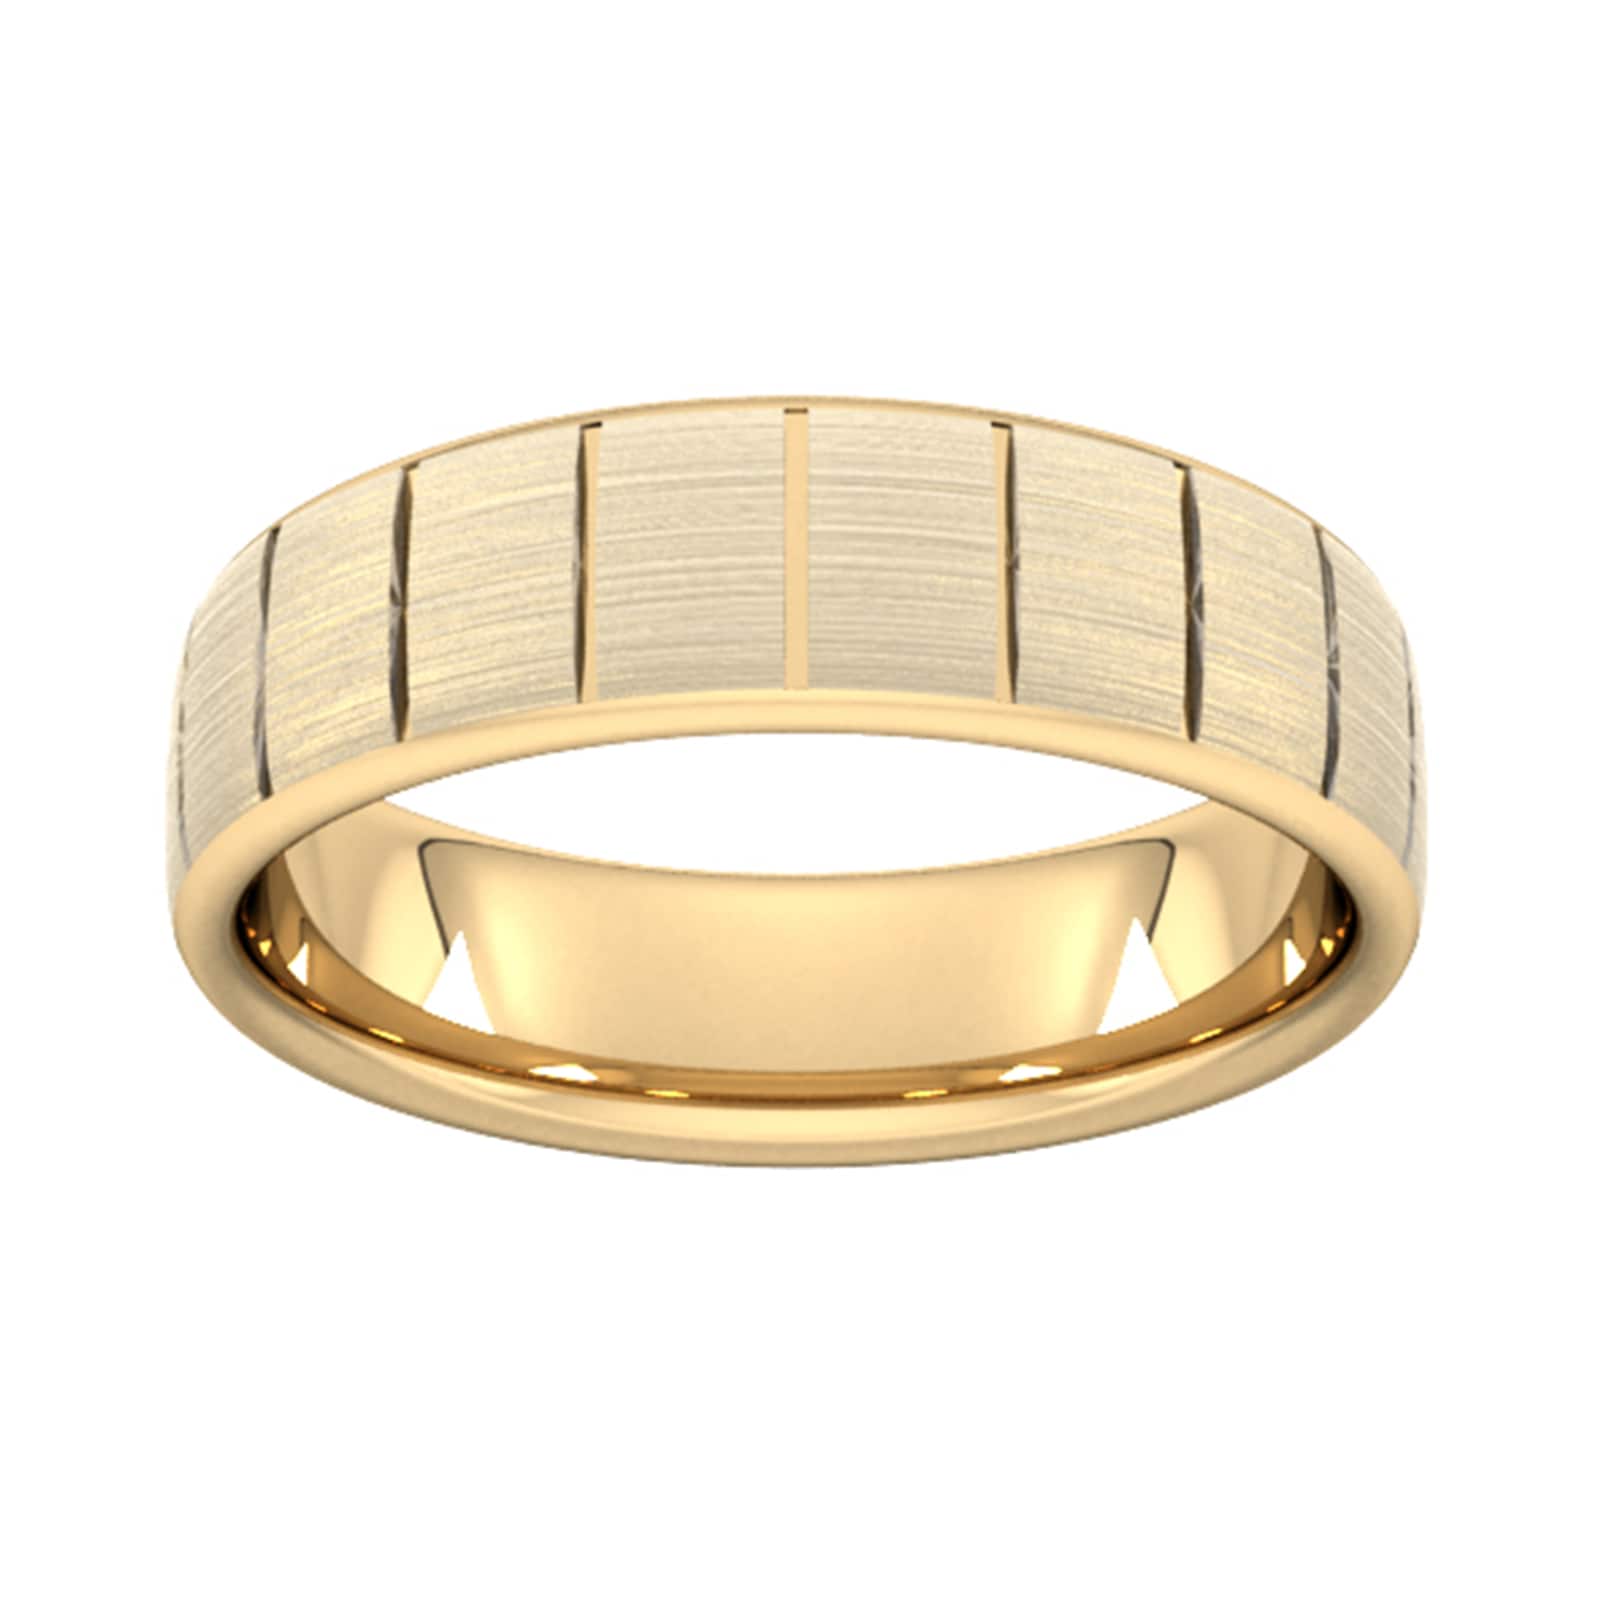 6mm D Shape Heavy Vertical Lines Wedding Ring In 18 Carat Yellow Gold - Ring Size P